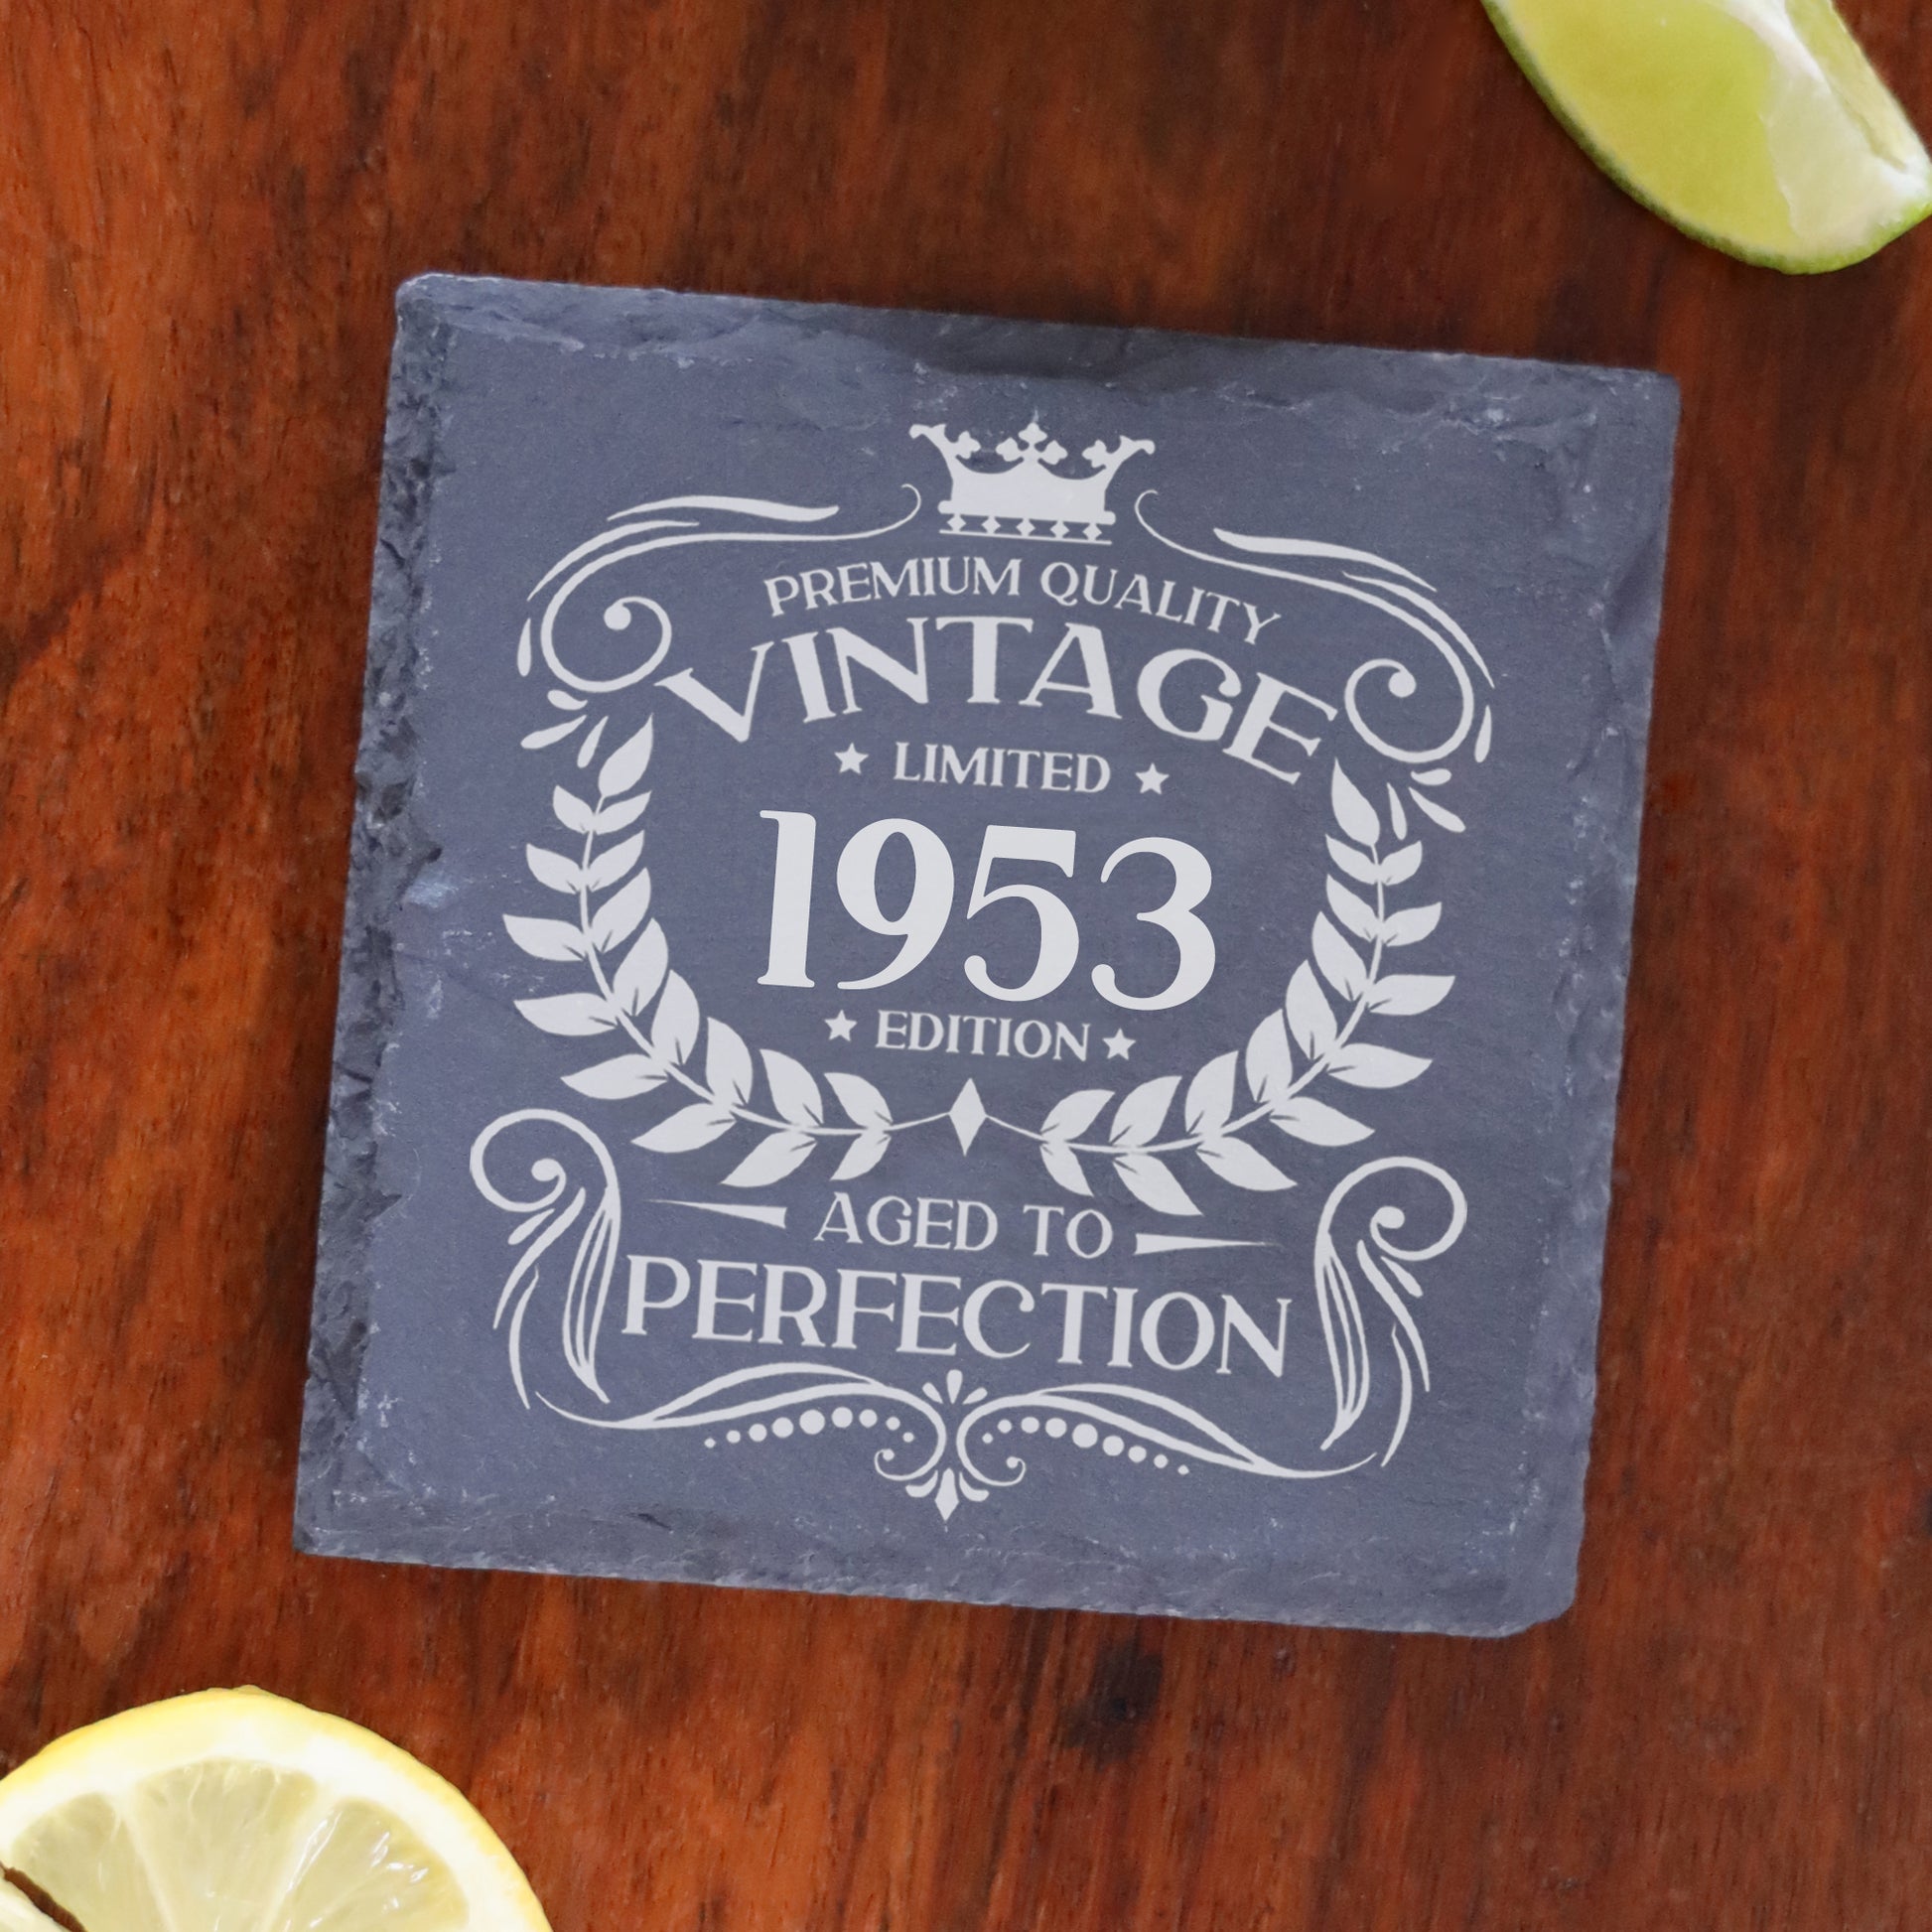 Vintage 1953 70th Birthday Engraved Gin Glass Gift  - Always Looking Good - Square Coaster Only  